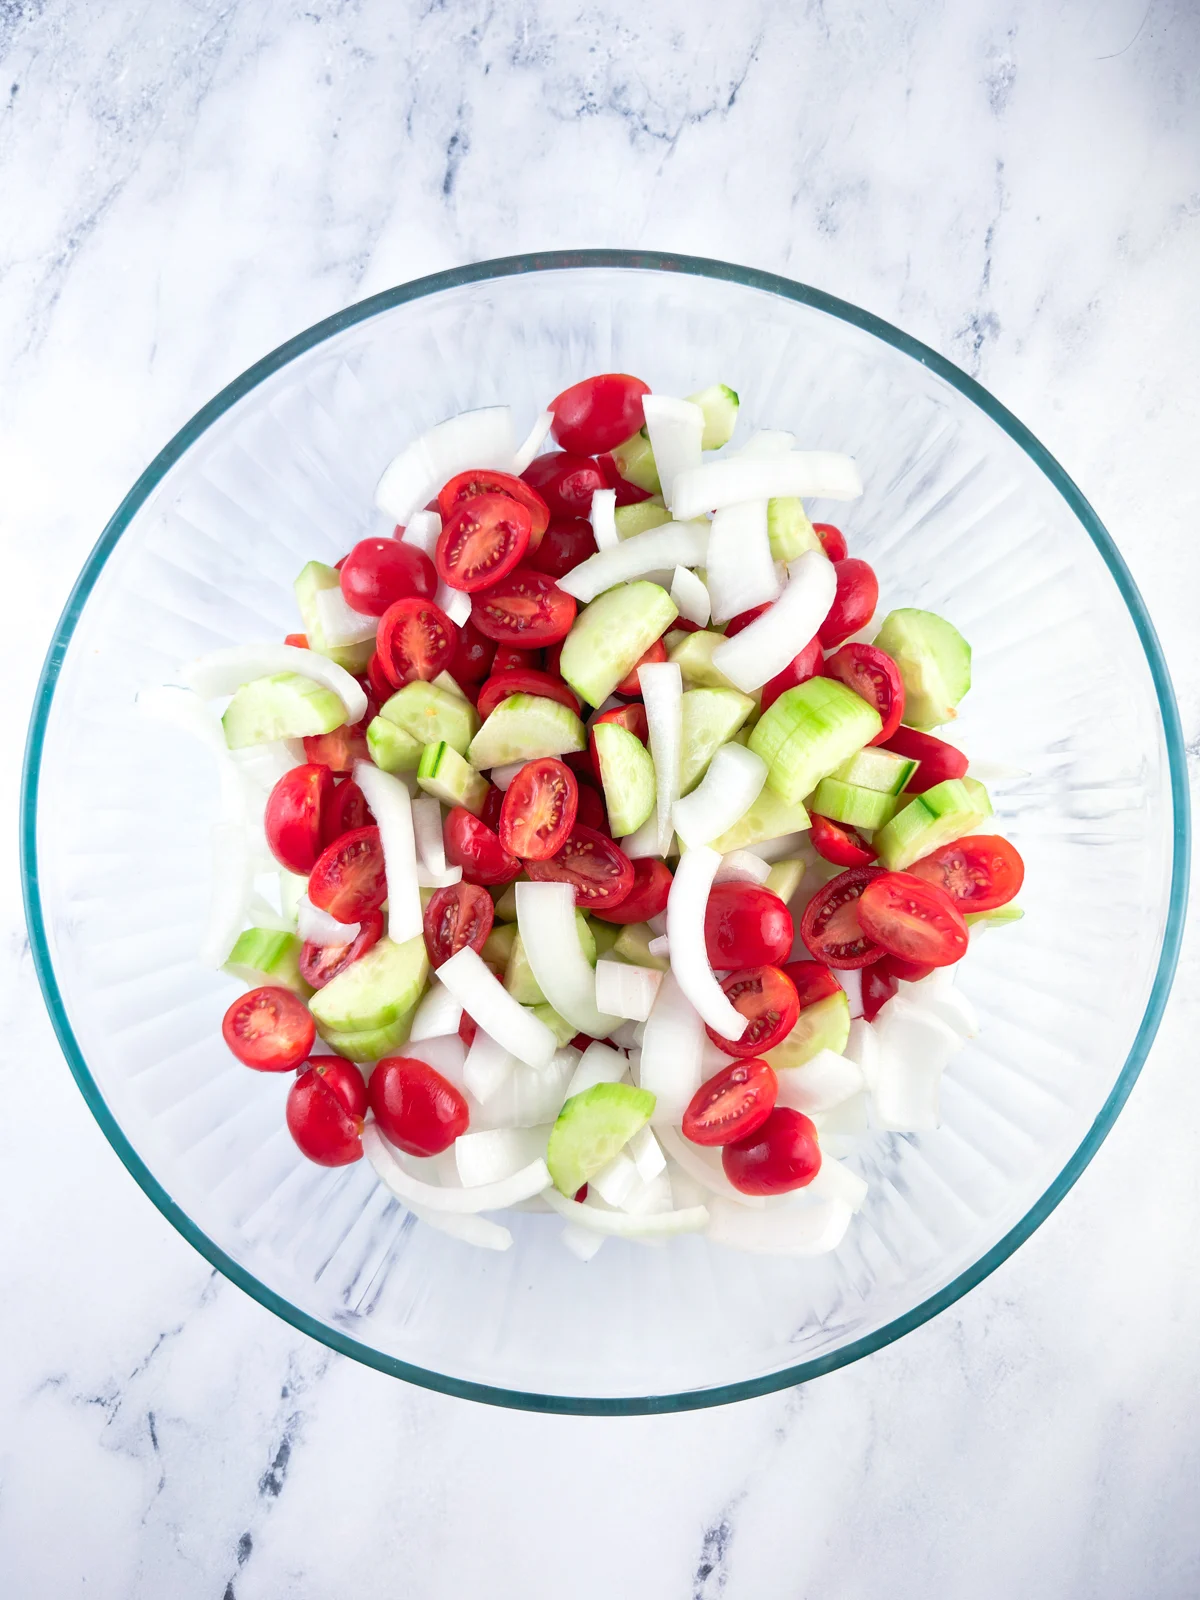 Sliced onion, tomato, and cucumber in a glass mixing bowl